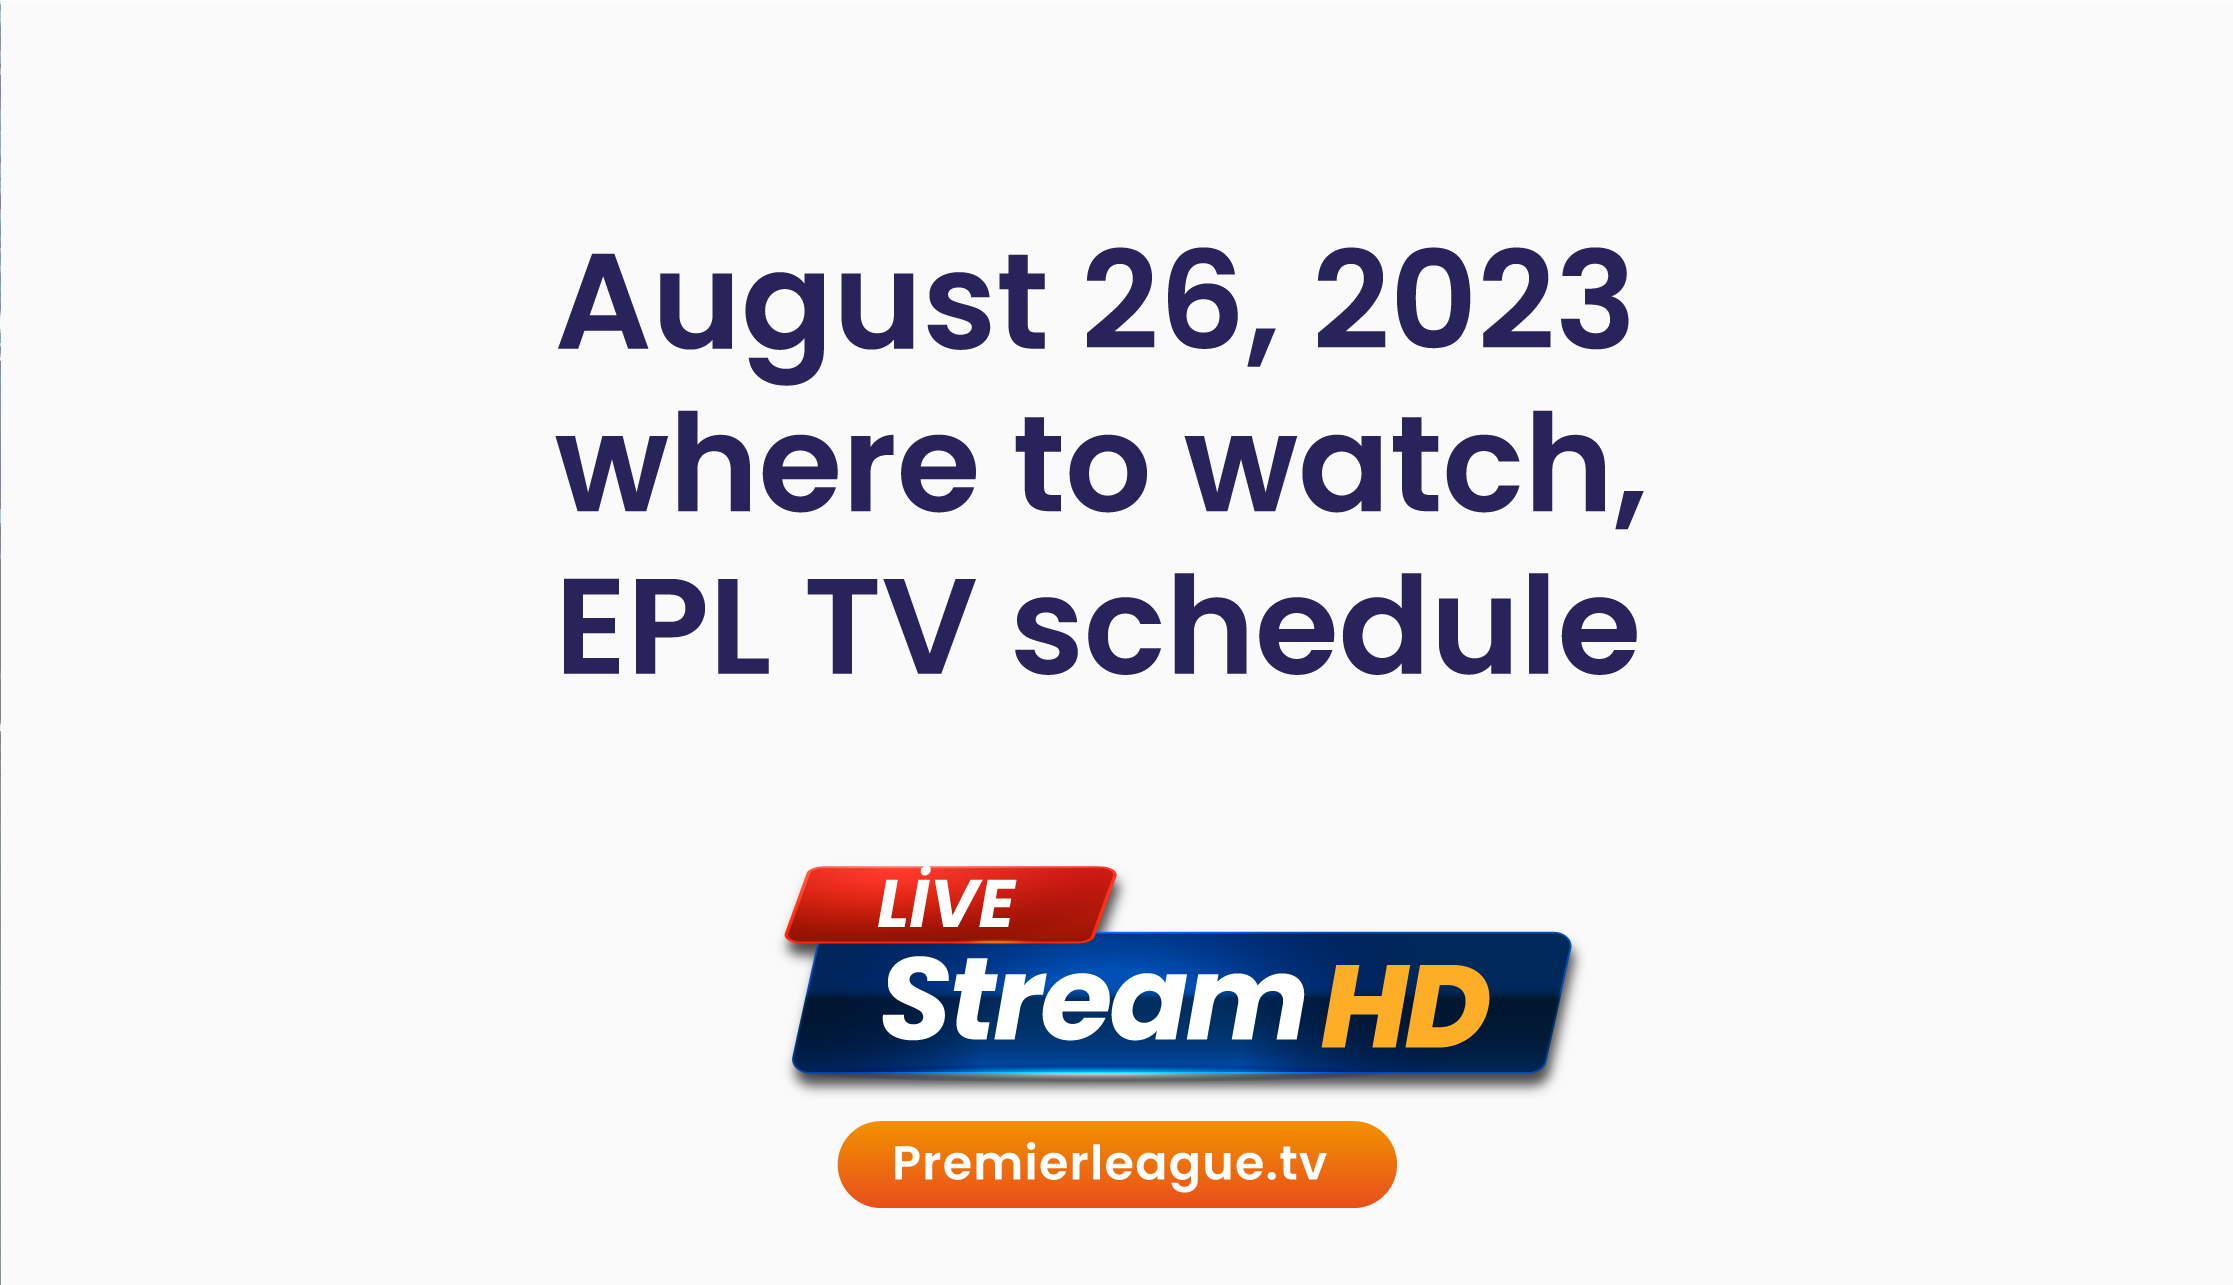 August 26, 2023 Premier League what matches are there, where to watch, EPL TV schedule